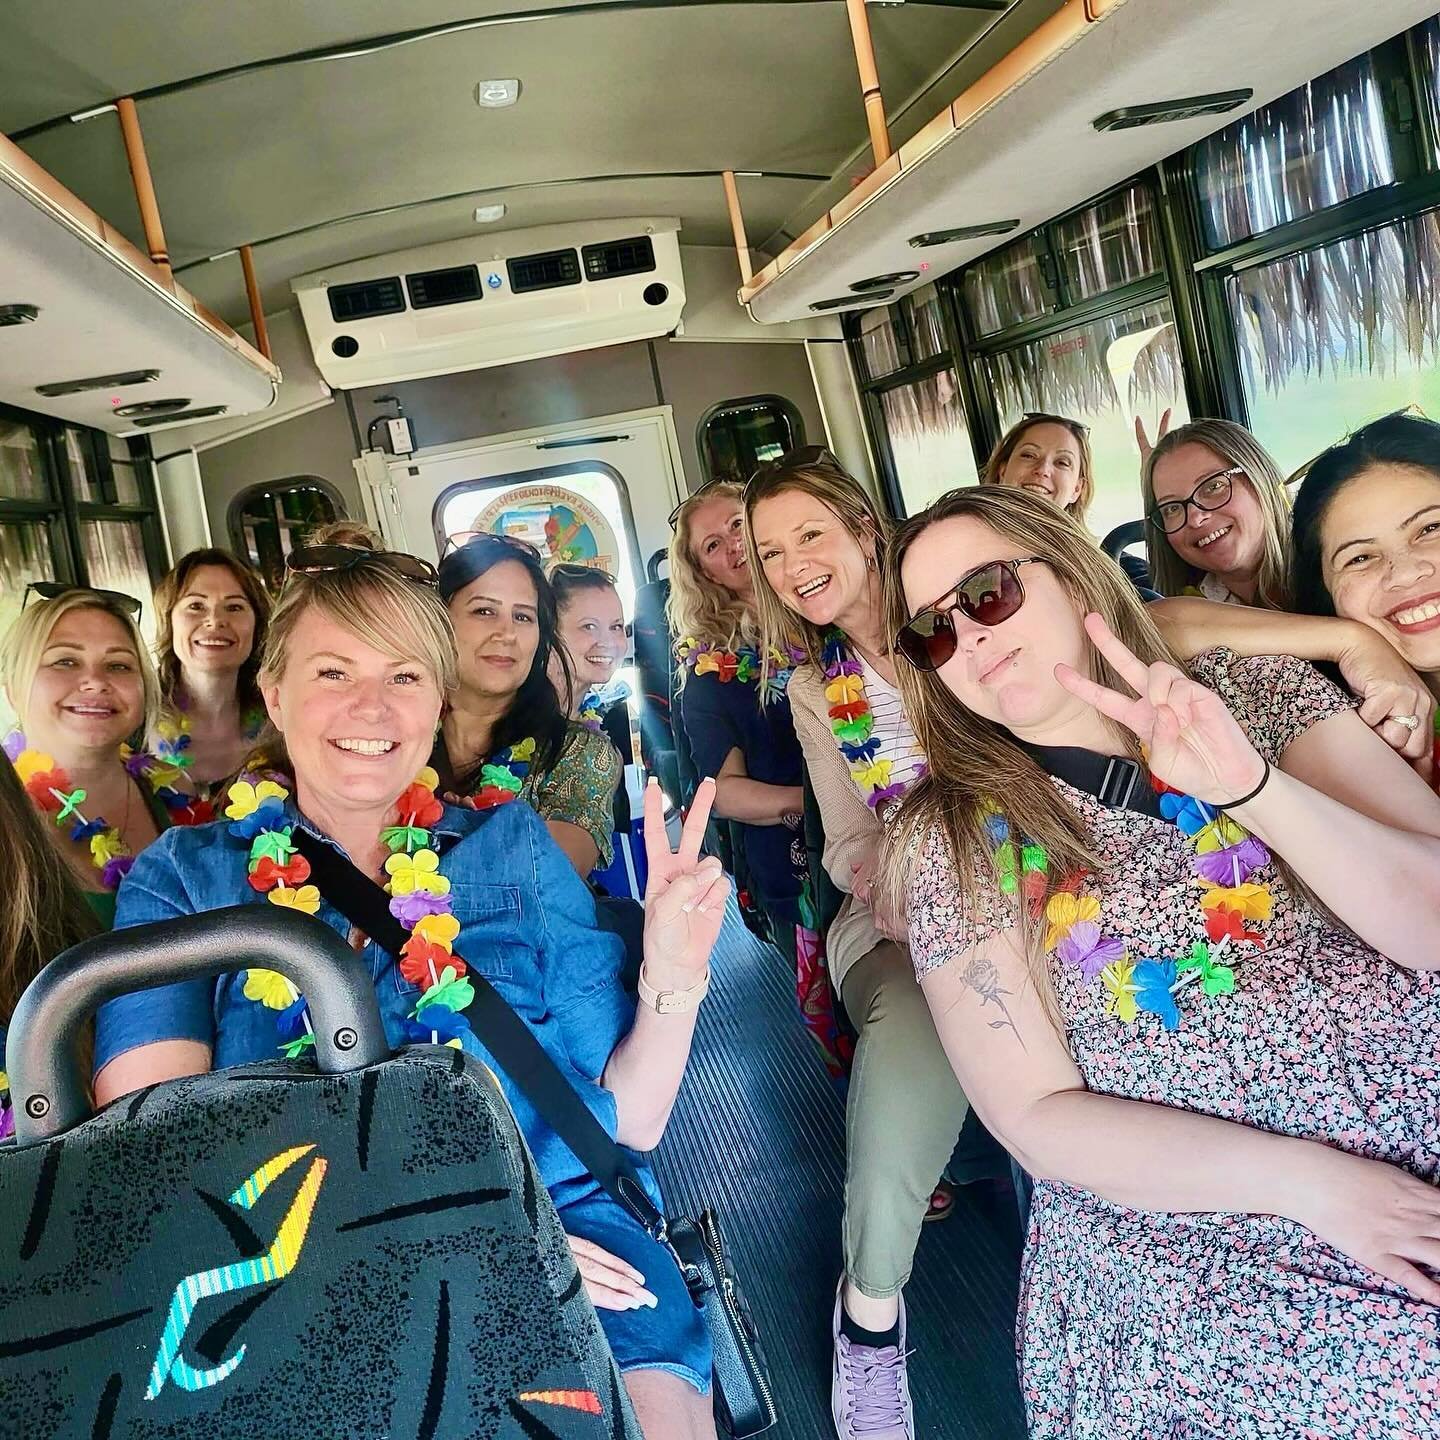 Spring is wine tour season!! 🍷 If you and your friends have never been on a Tiki Time Tasting Tour, you&rsquo;ve been missing out. We&rsquo;ve got the best tour guides, tasting routes for all your favourite wineries, and most exciting rides in town 